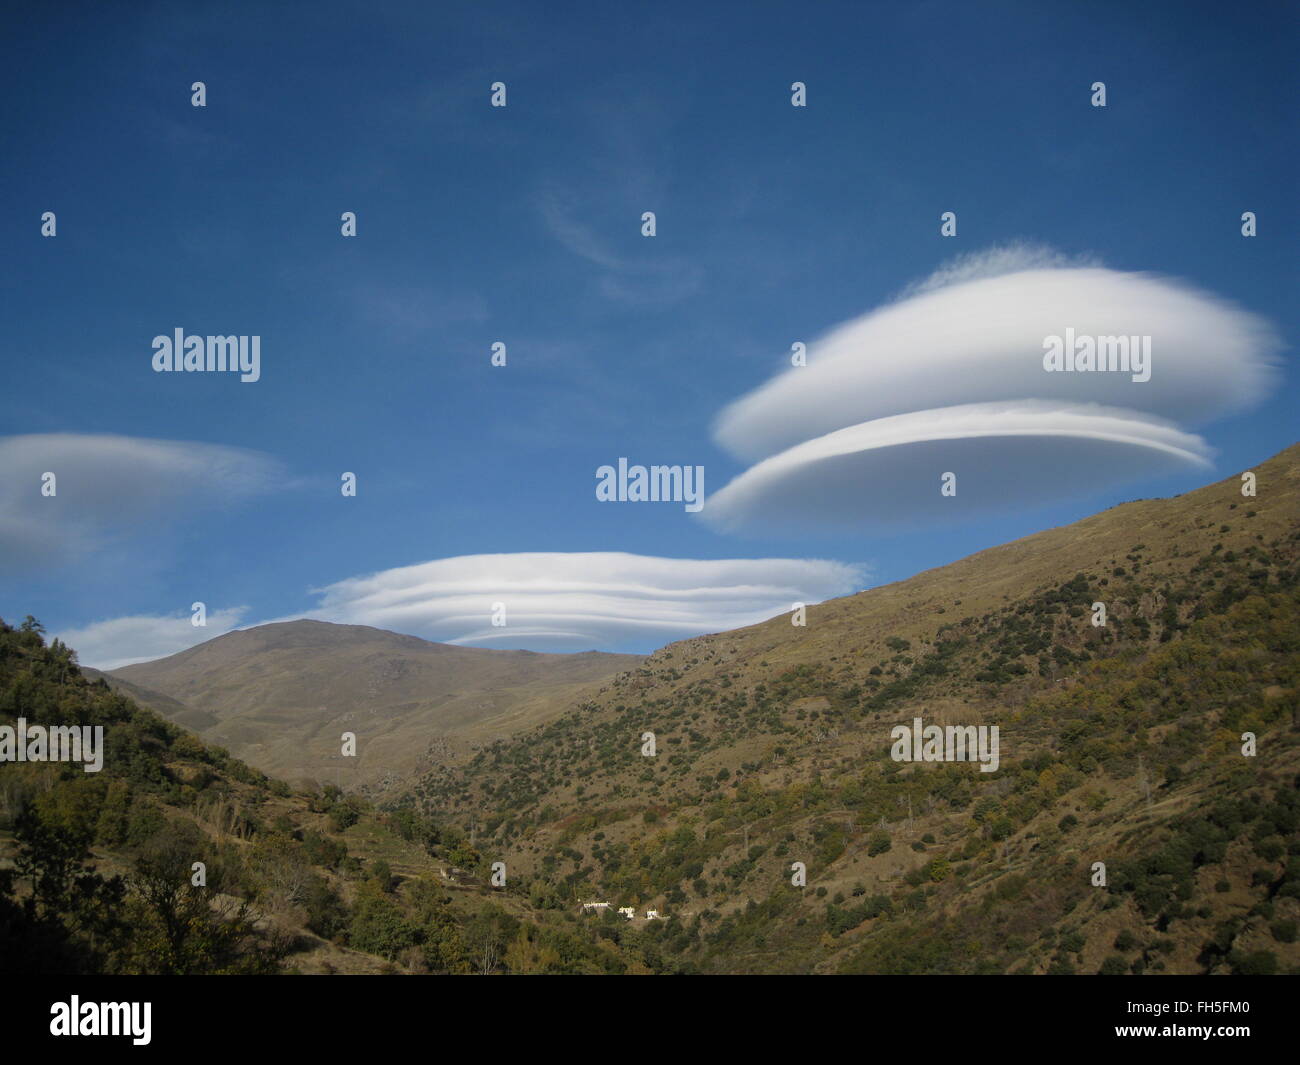 Lenticular Clouds of Sierra Nevada Mountains, Spain Stock Photo